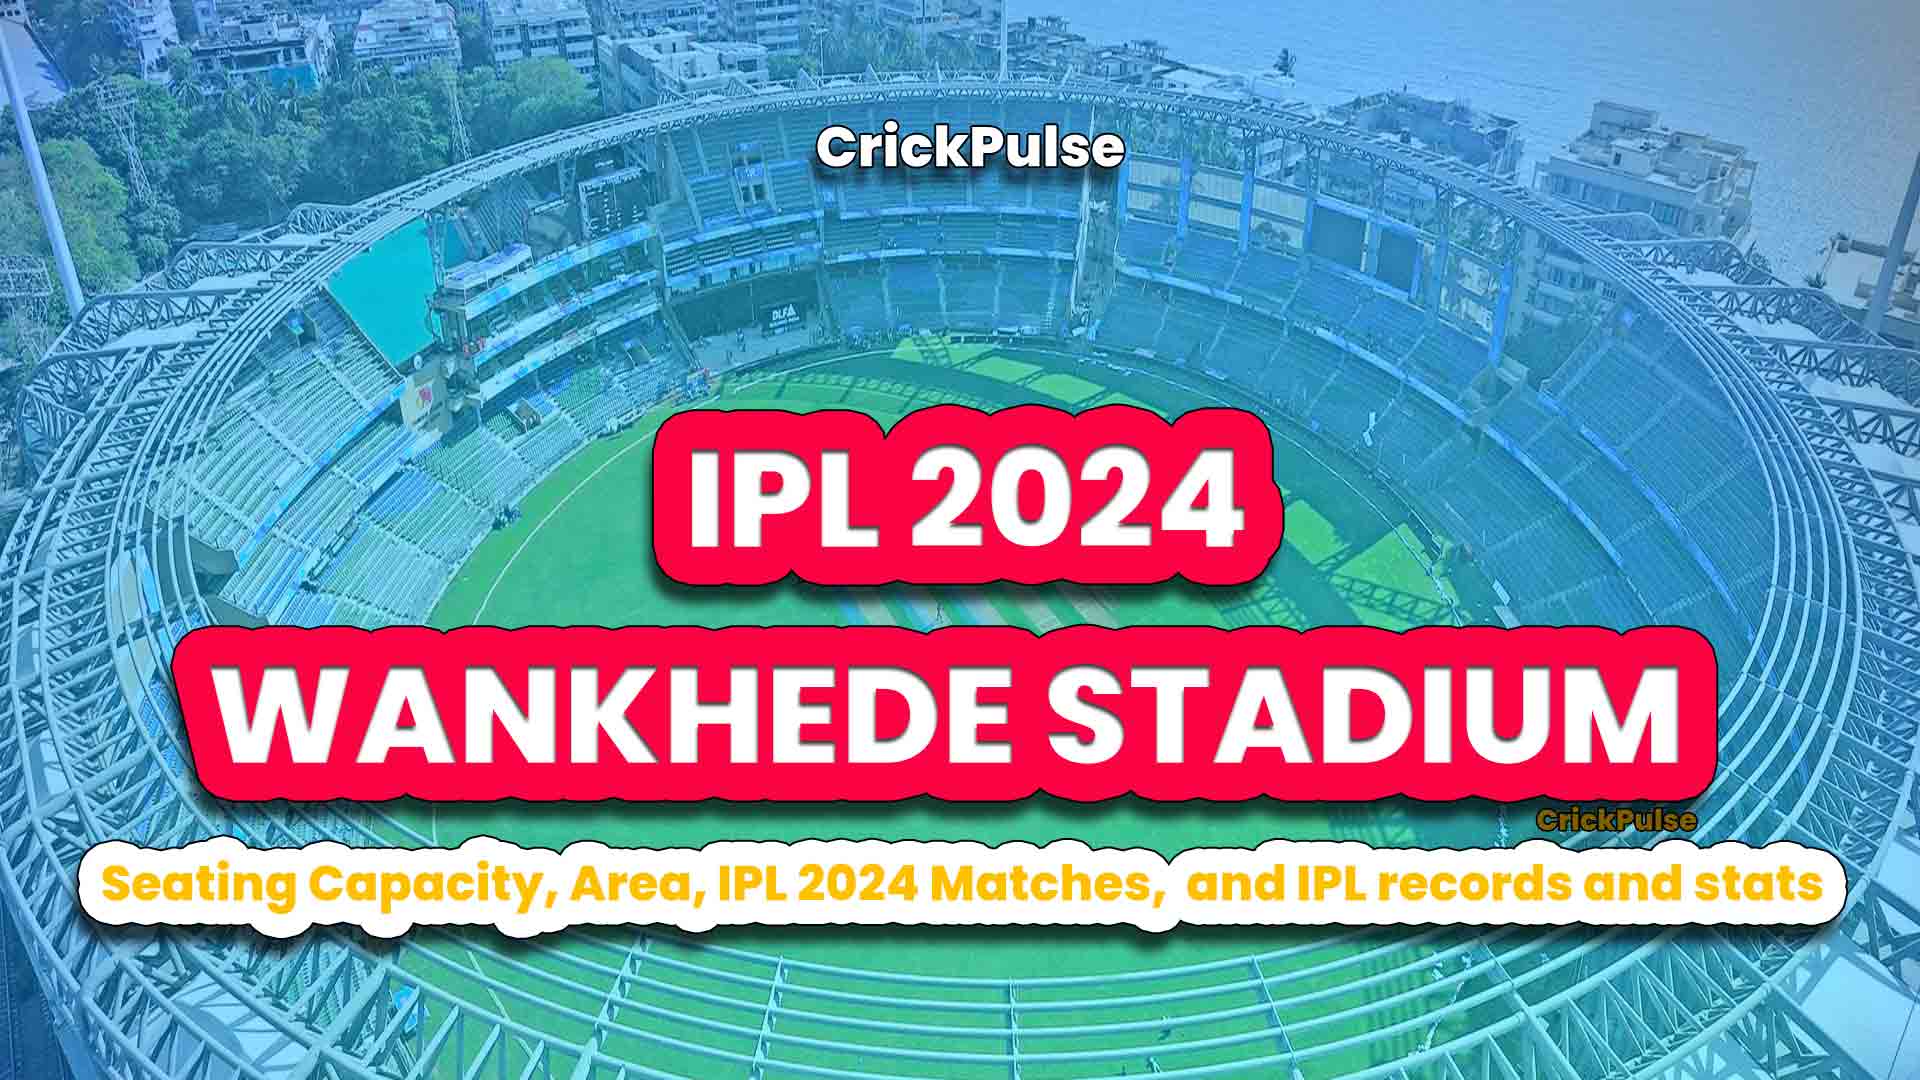 wankhede-stadium-Seating-Capacity-Area-IPL-2024-Matches-IPL-records-and-stats